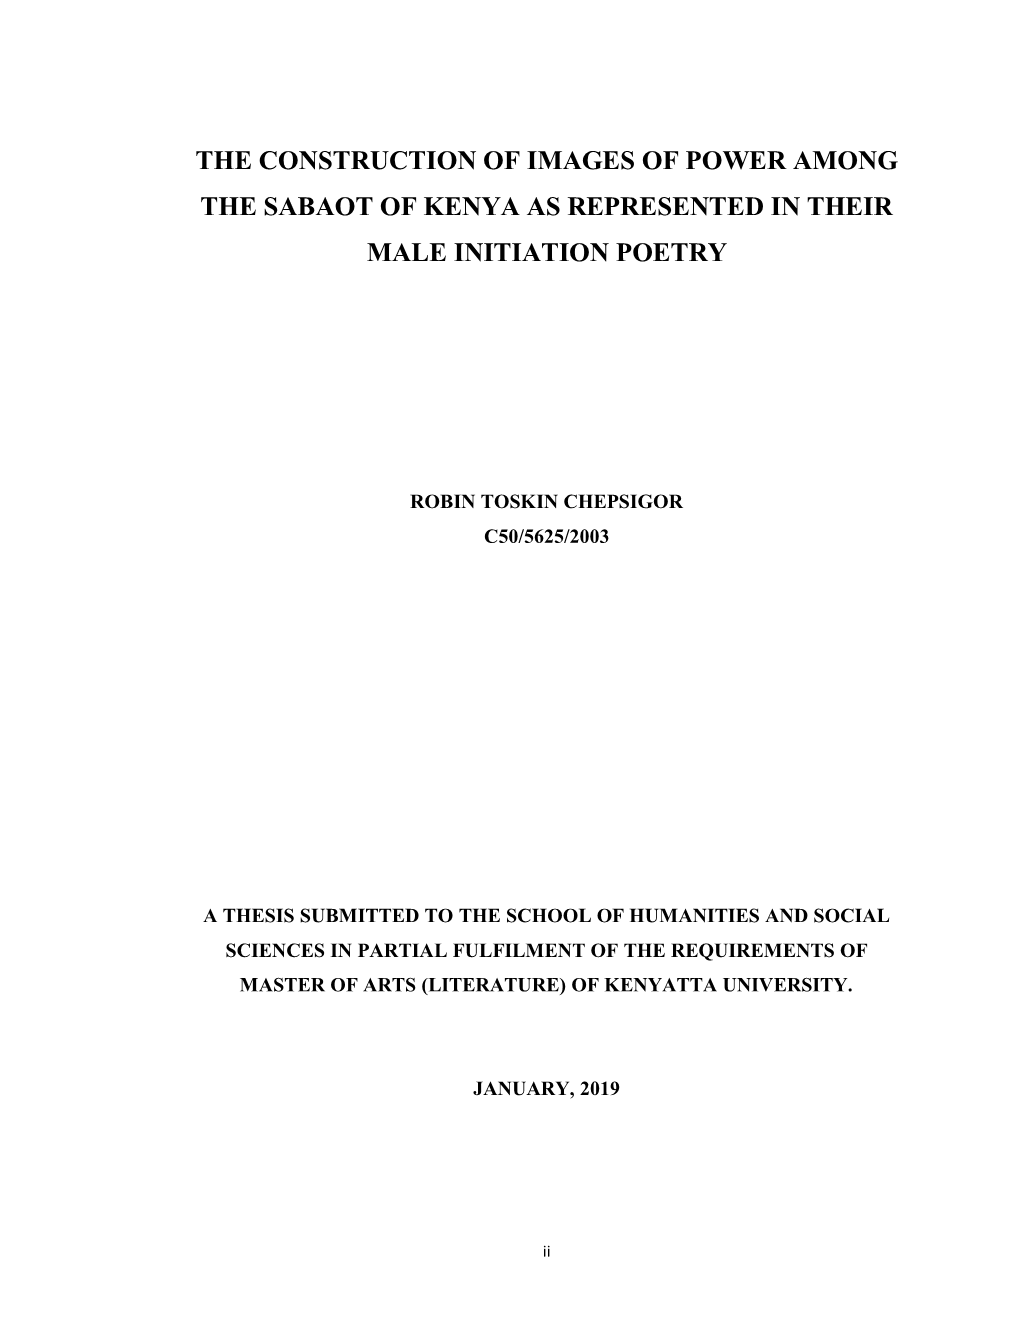 The Construction of Images of Power Among the Sabaot of Kenya As Represented in Their Male Initiation Poetry